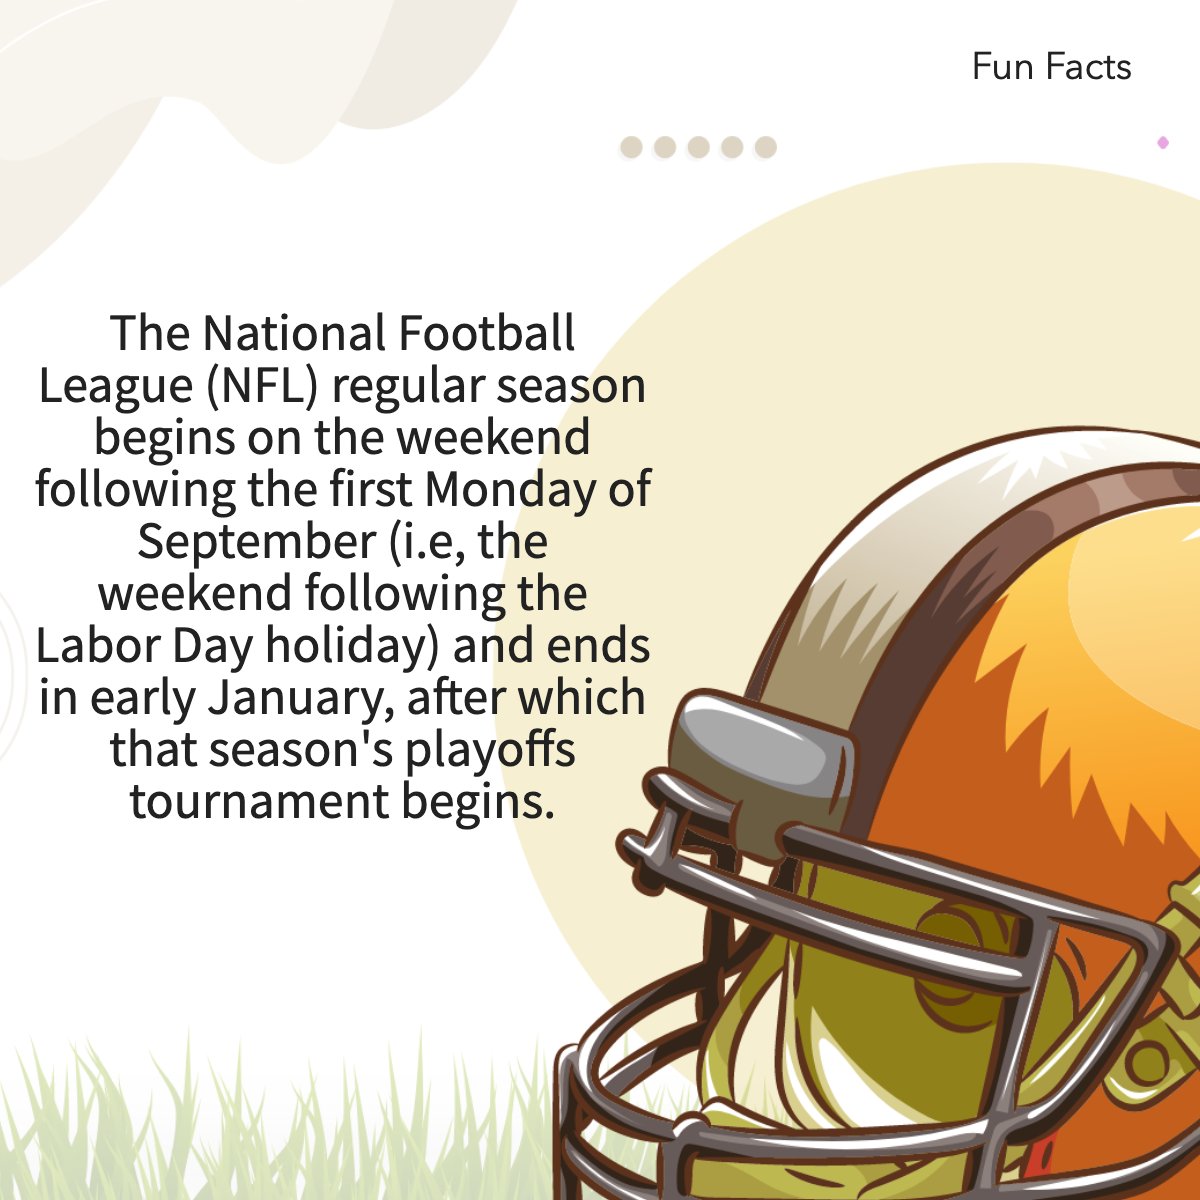 Do you watch the regular season of the NFL?

Let us know below!

#americanfootball #nflfootball #sportsfacts #didyouknow #superbowl